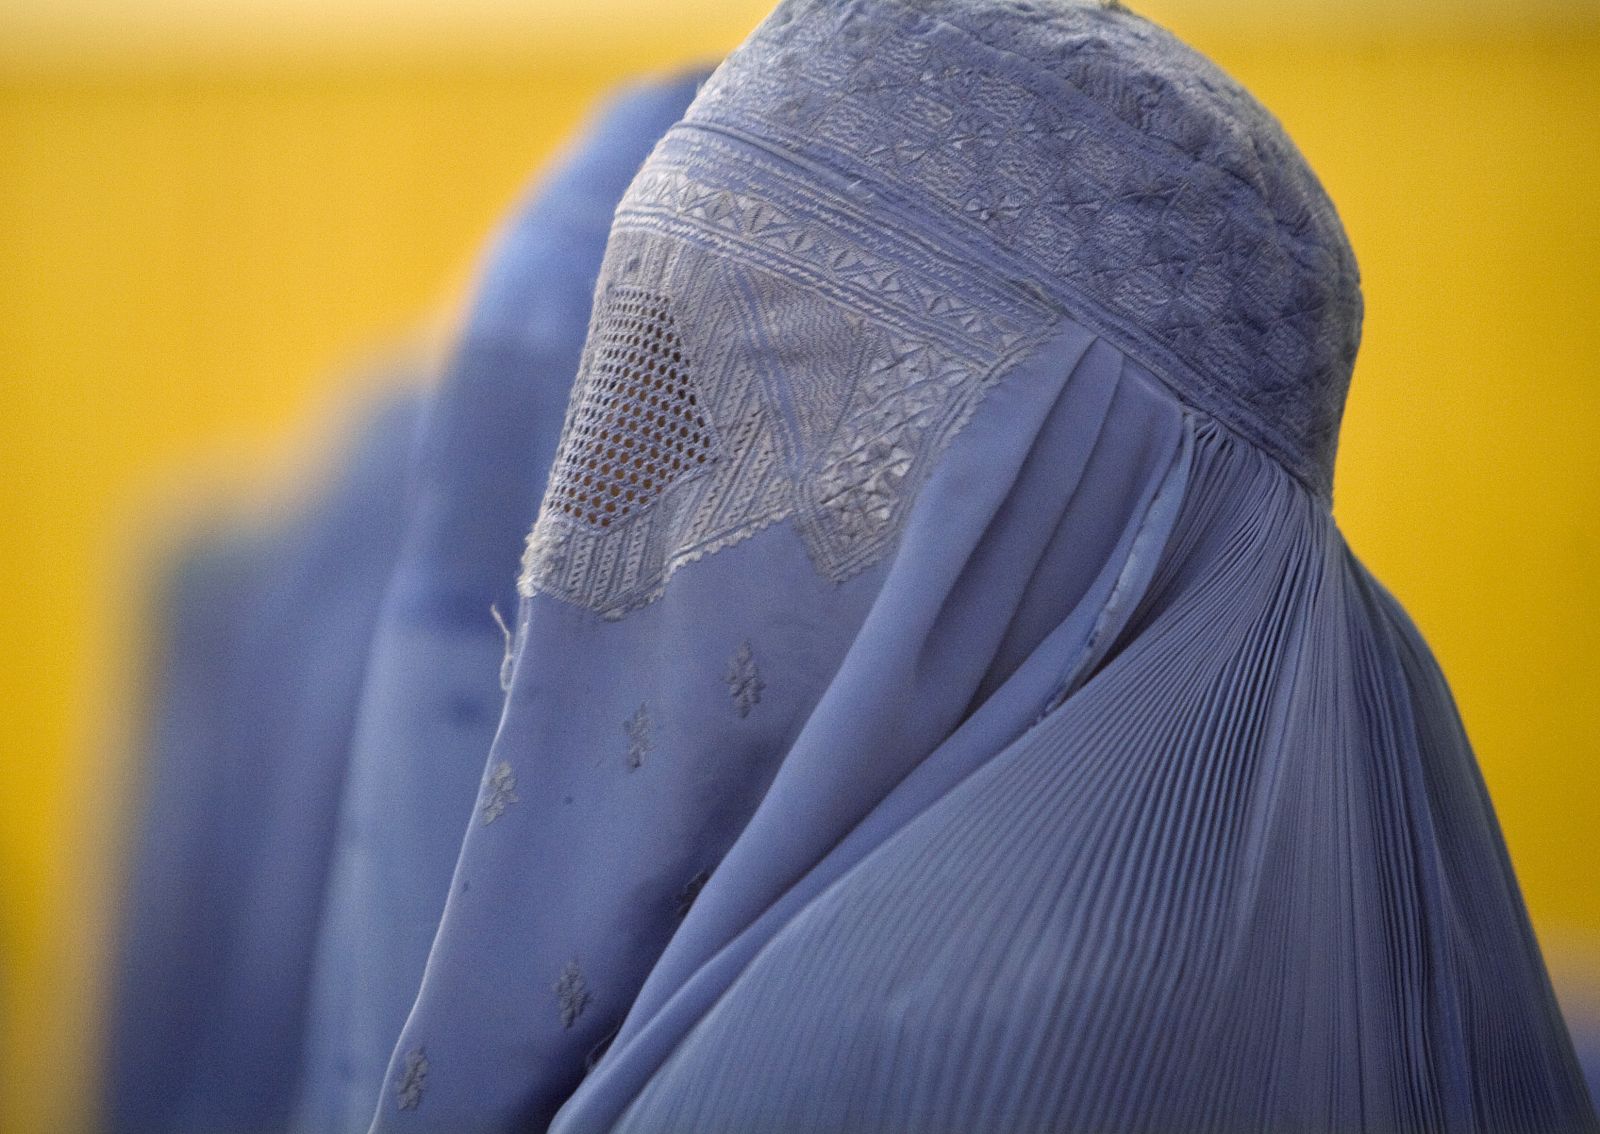 Afghan women attend a conference on violence against women in Herat